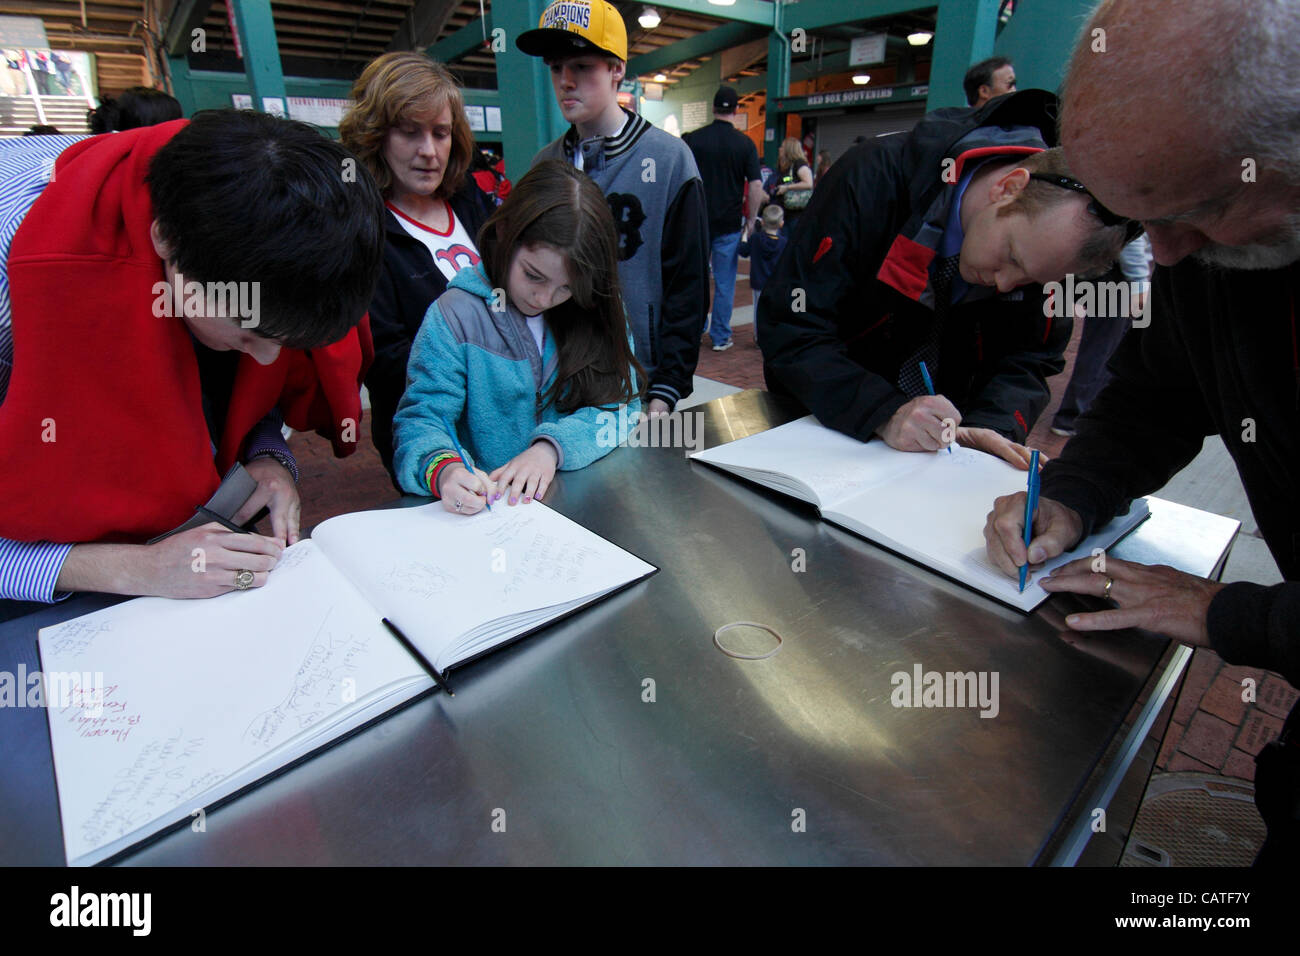 Boston, Massachusetts, USA. April 19, 2012. Red Sox Fans of all ages sign their names and birthday wishes to Fenway Park in blank books on its 100th Anniversary 'Open House'. Stock Photo